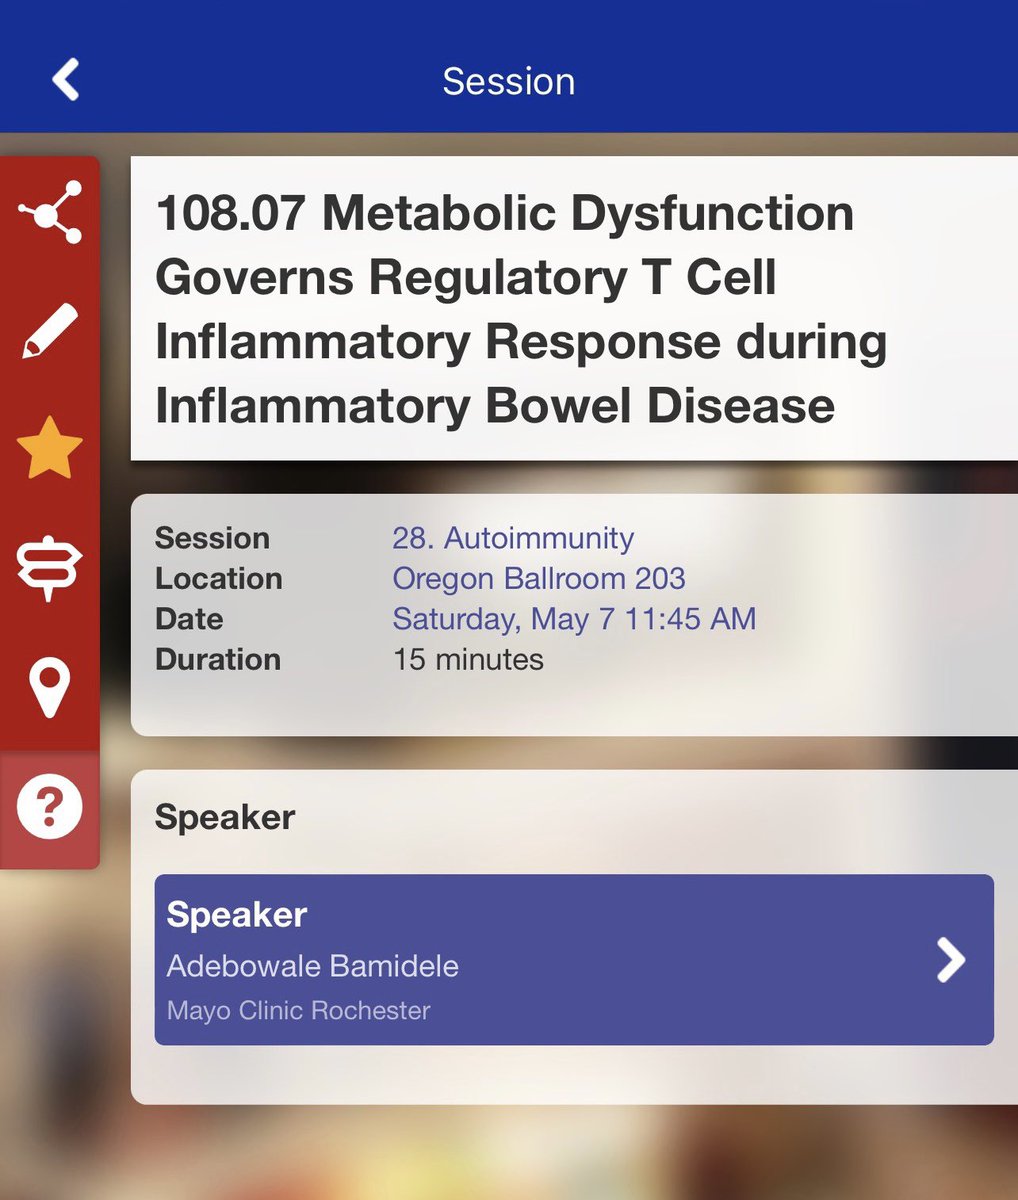 Are you at #AAI2022? @WaleBamidelePhD is giving a talk on T cell metabolism and intestinal inflammation Sat: 11:45 am, room 203! #AAI #immunometabolism #Immunology2022